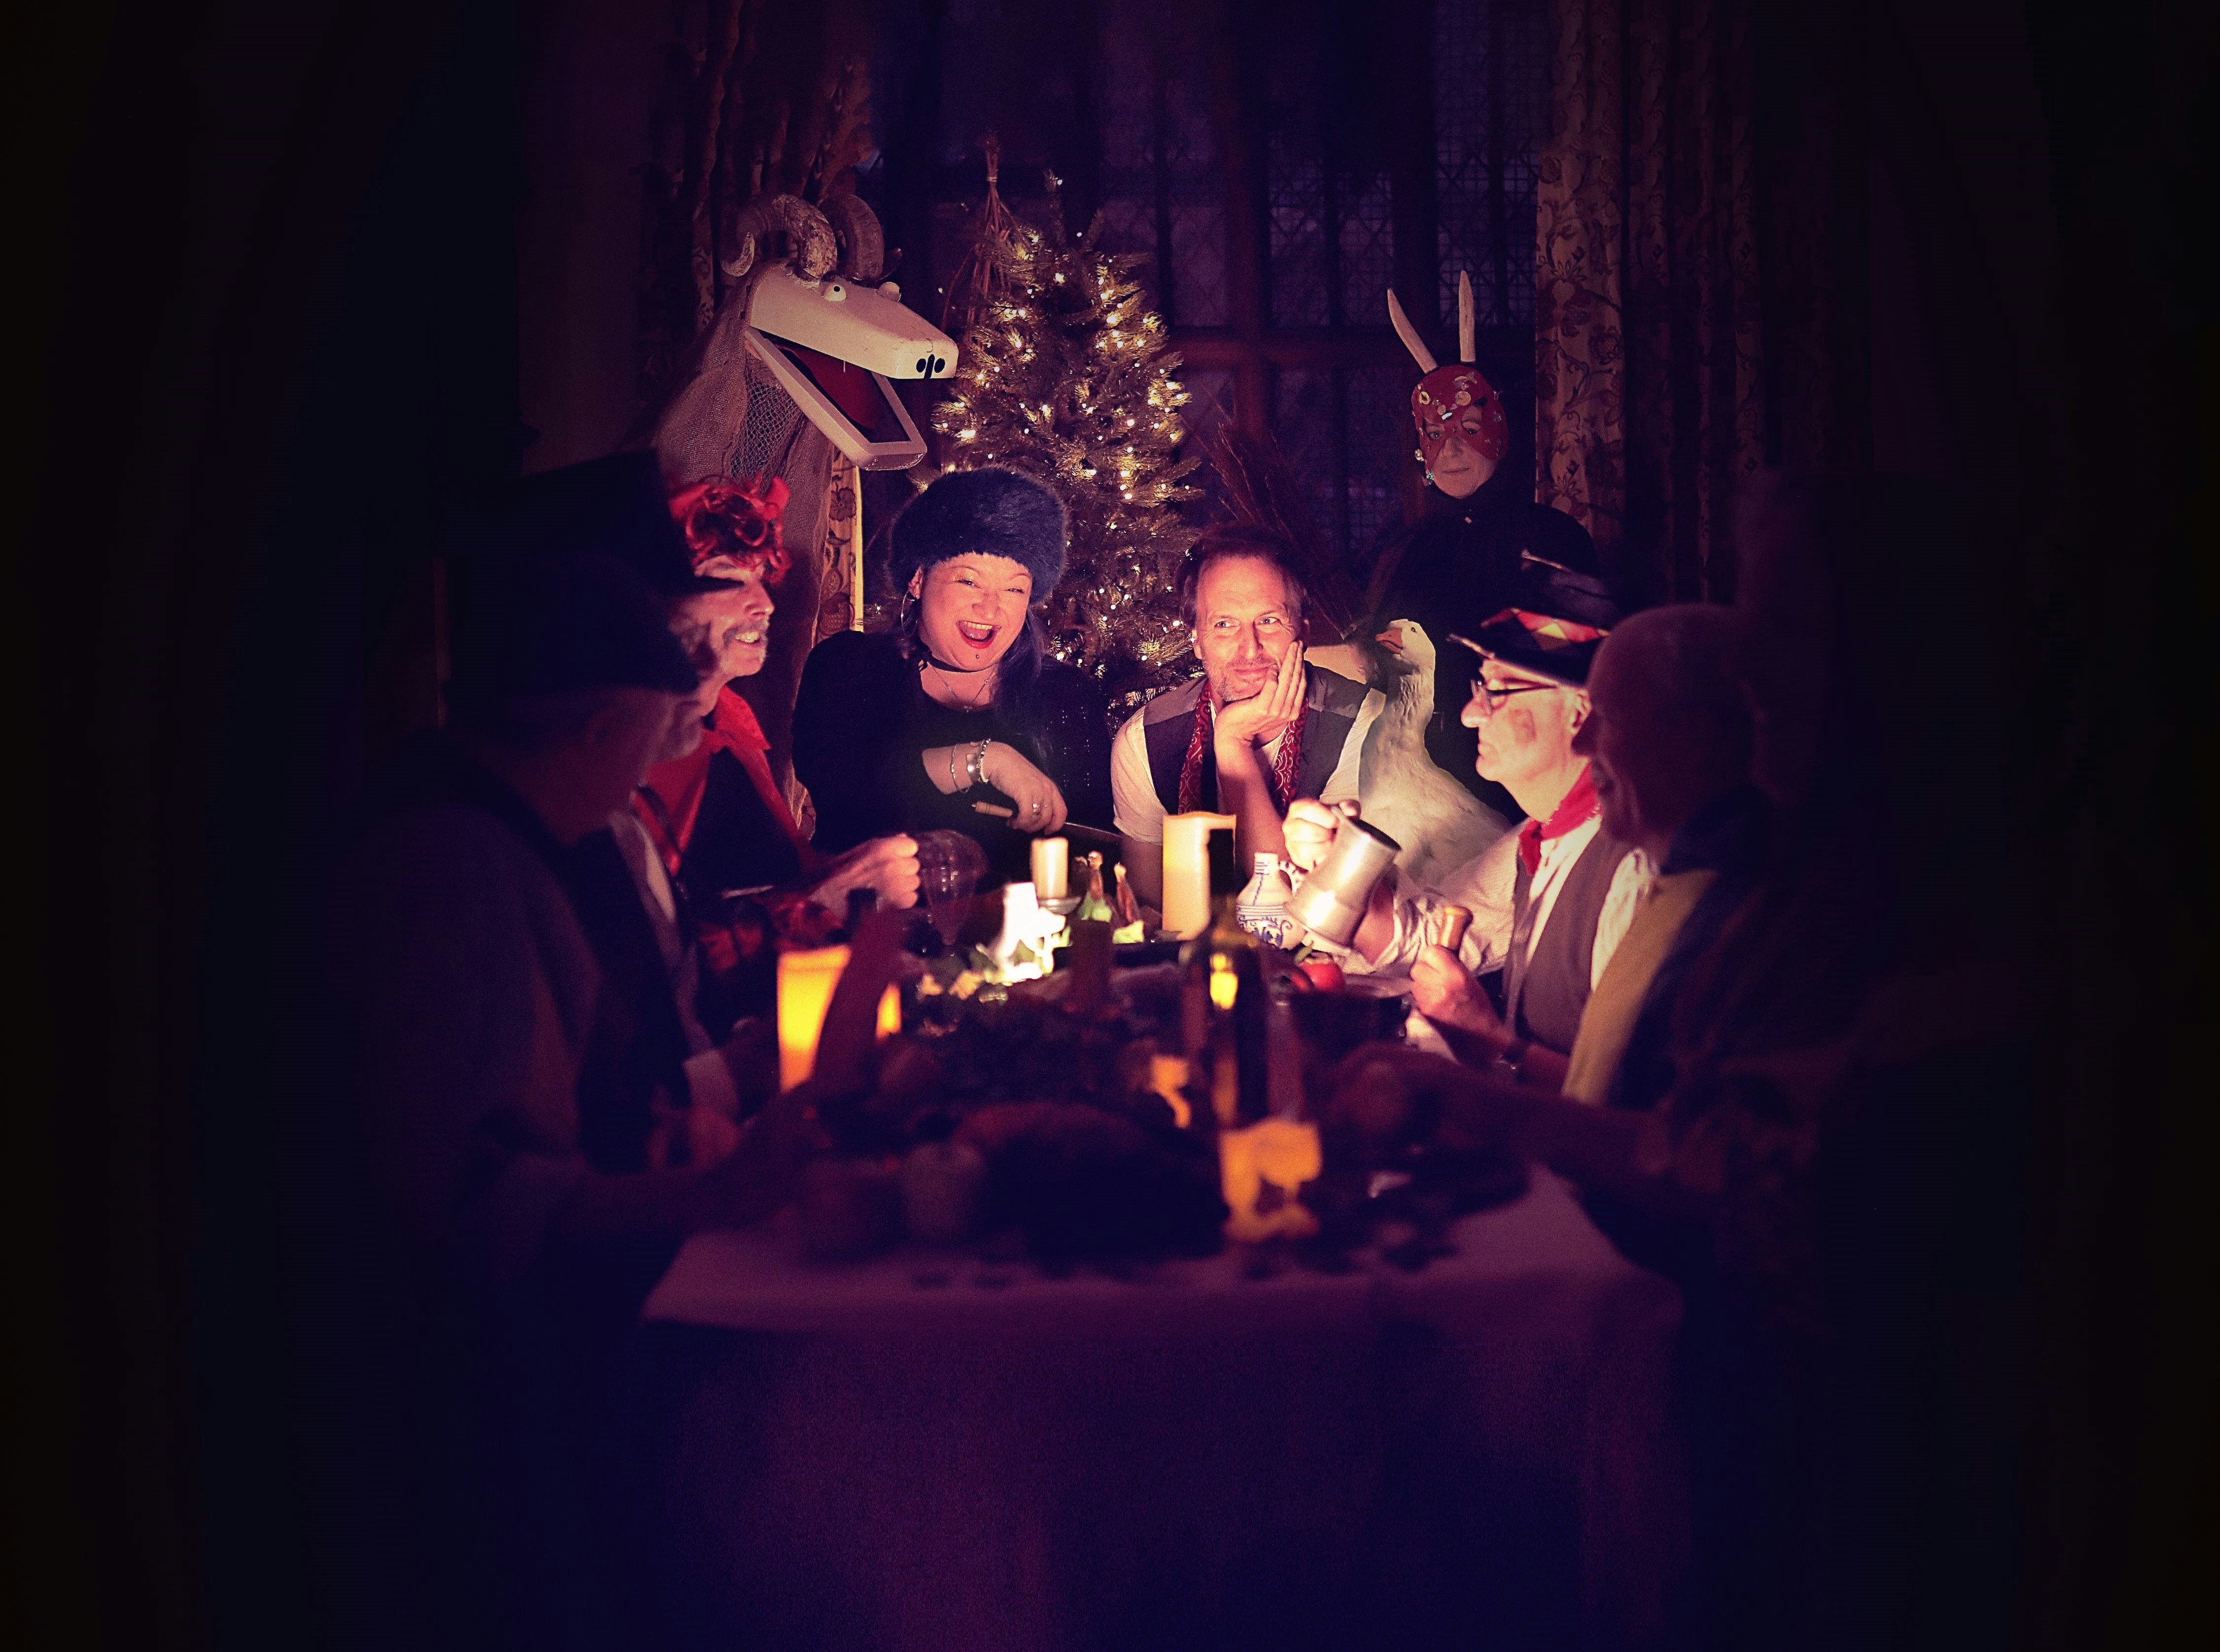 The image is dark with a table lit at the centre of the image by candlelight. A group of 6 people sit around the table laughing at eachother.